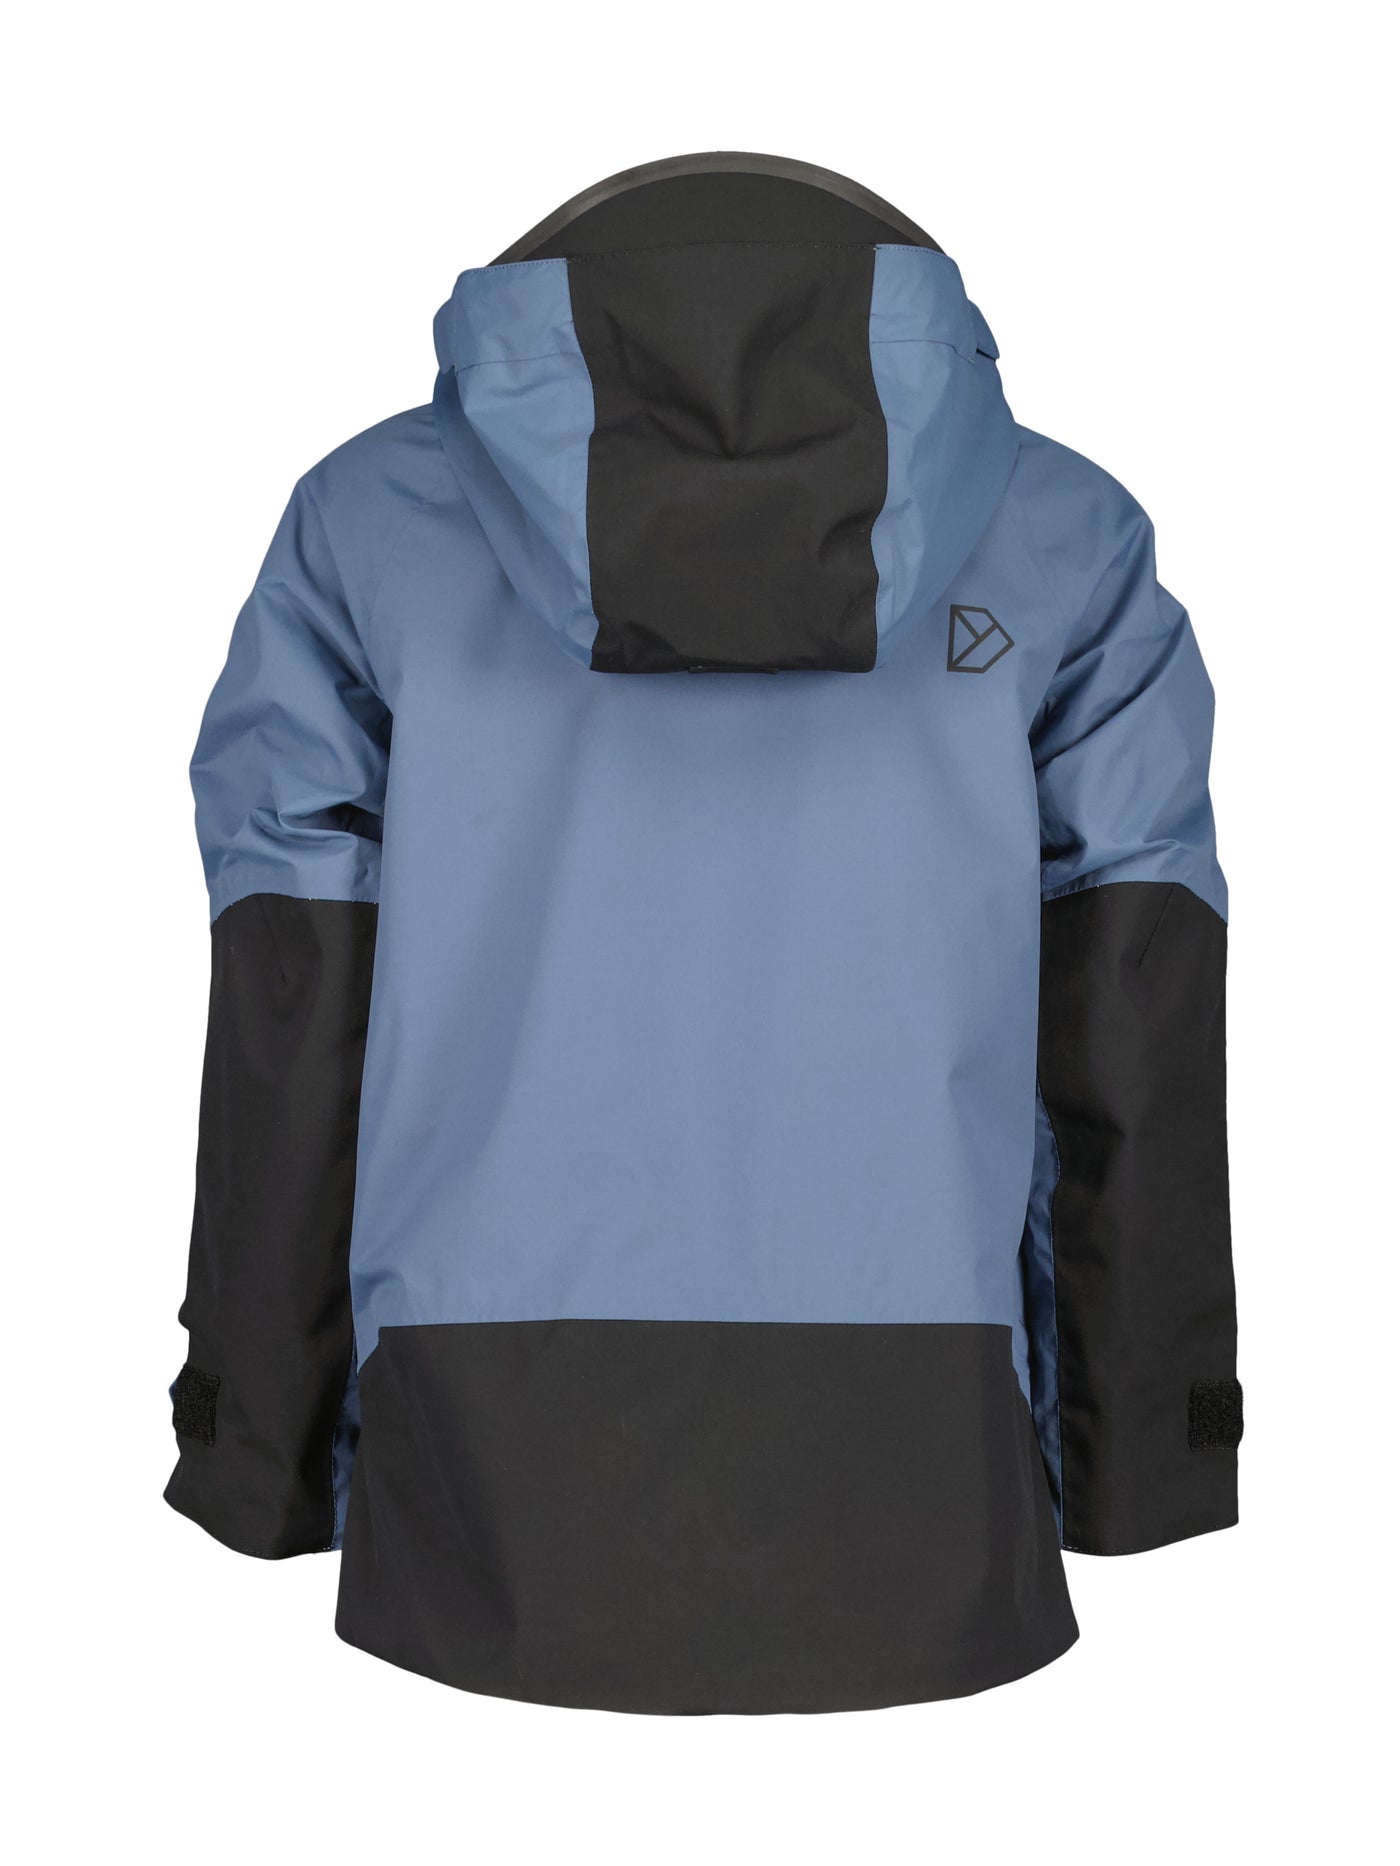 Salvia Kids' Jacket - Children's and youth's shell jacket